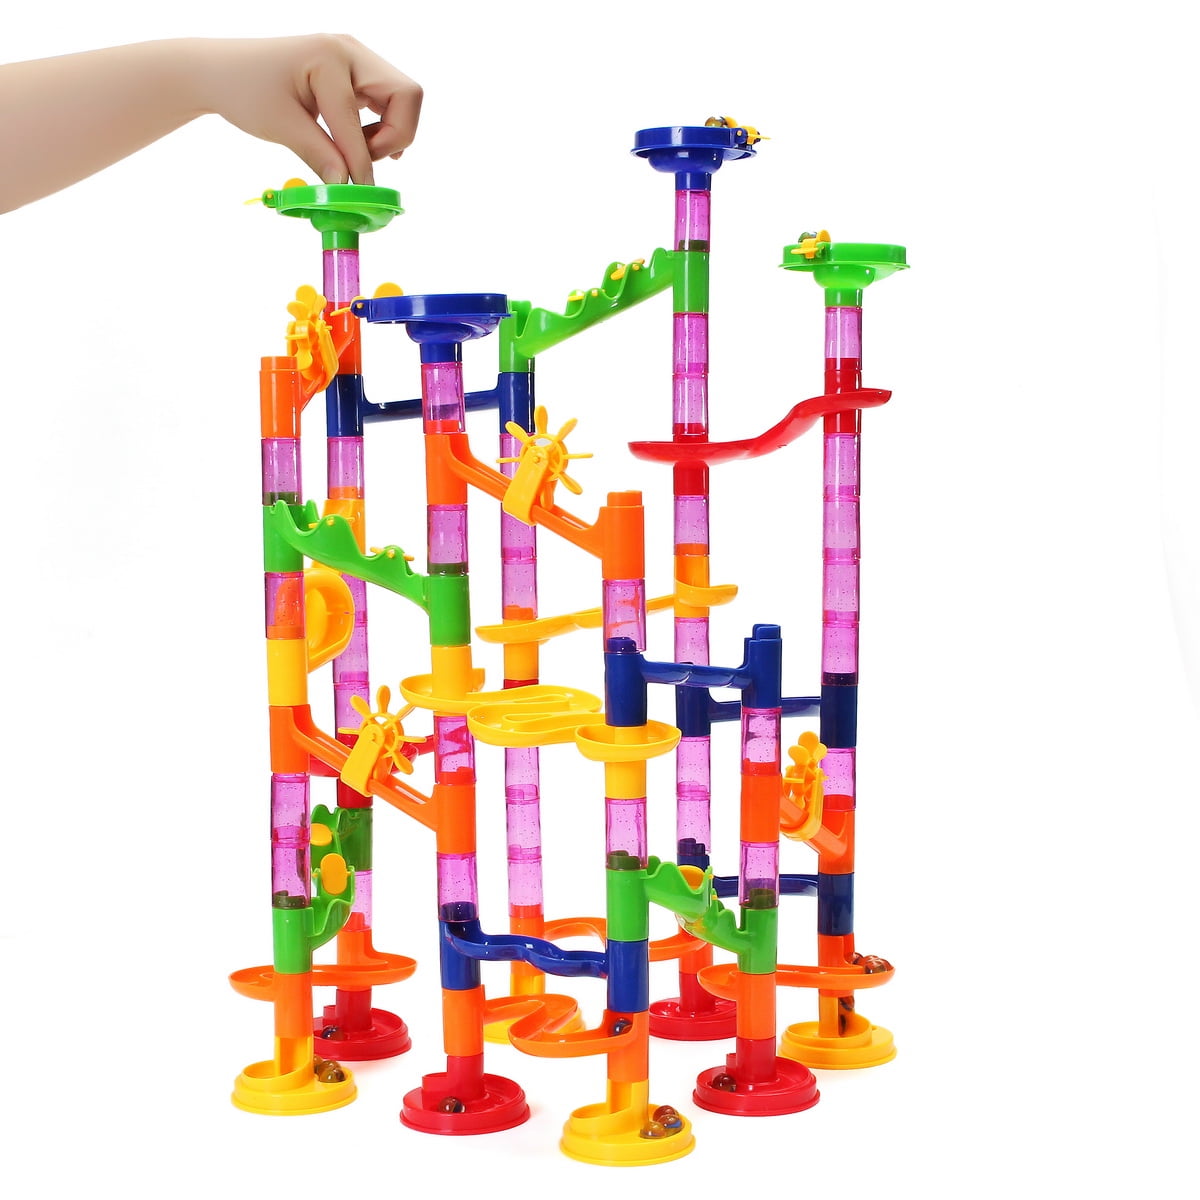 Marble Run Set 105 Pcs Construction Building Blocks Toys Game for 3 4 5 6 7 Year Old Boys Girls STEM Learning Toy Marble Maze Race Track Game Toys Gifts for Kids 